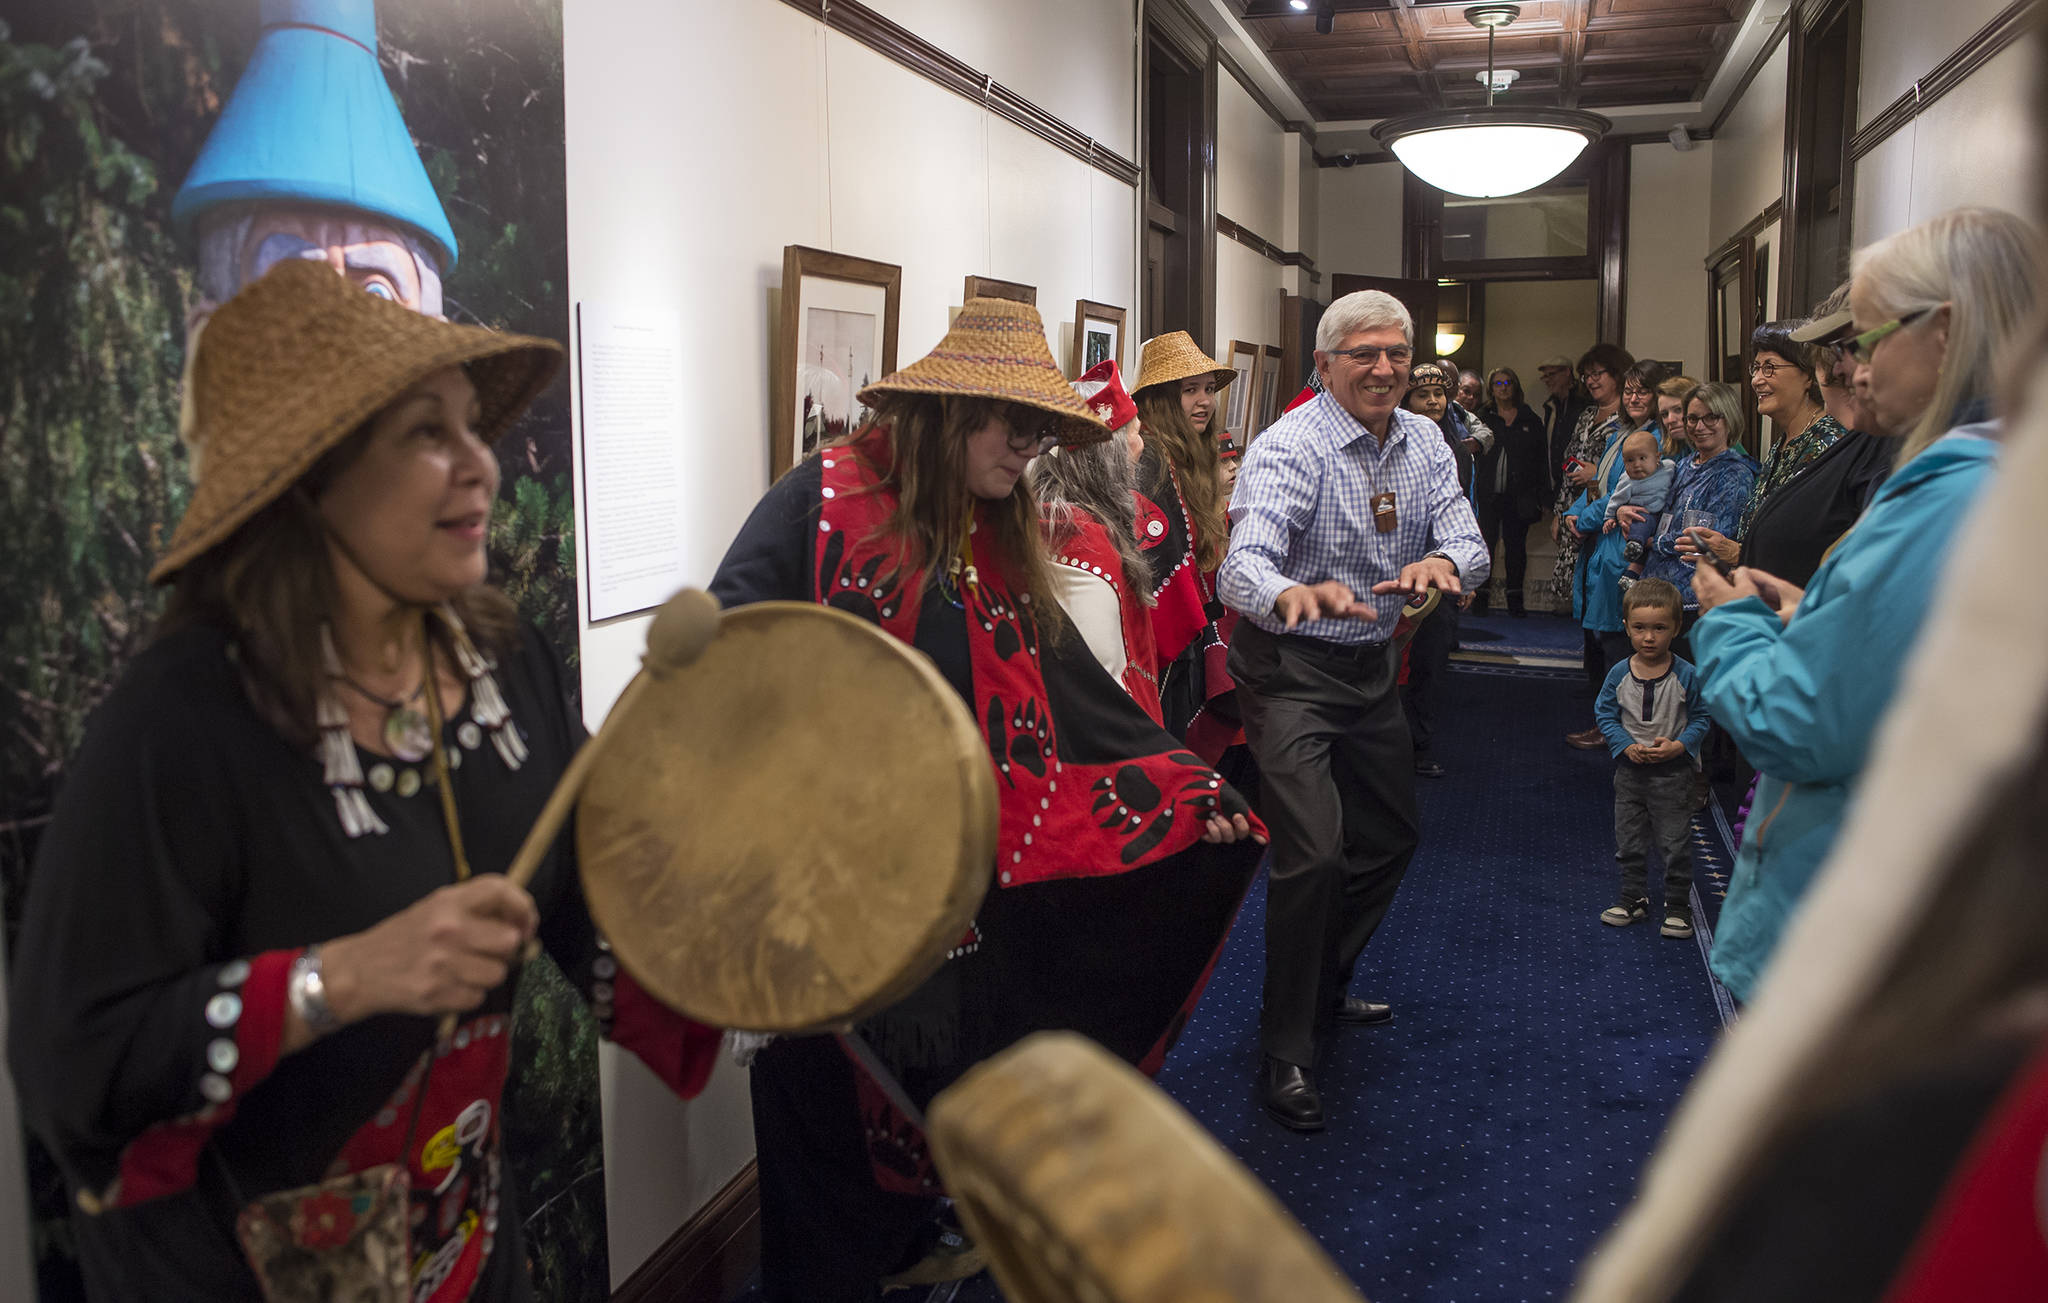 Lt. Gov. Byron Mallott dances to the drumming of the Yees Ku Oo Dance Group during a First Friday event in the Lt. Governor’s Offices in the Capitol on Friday, Oct. 6, 2017. Maps, photographs, documents, and objects related to the 1867 transfer from Russia to the United States supplied by the Alaska Division of Libraries, Archives, and Museums were on display.